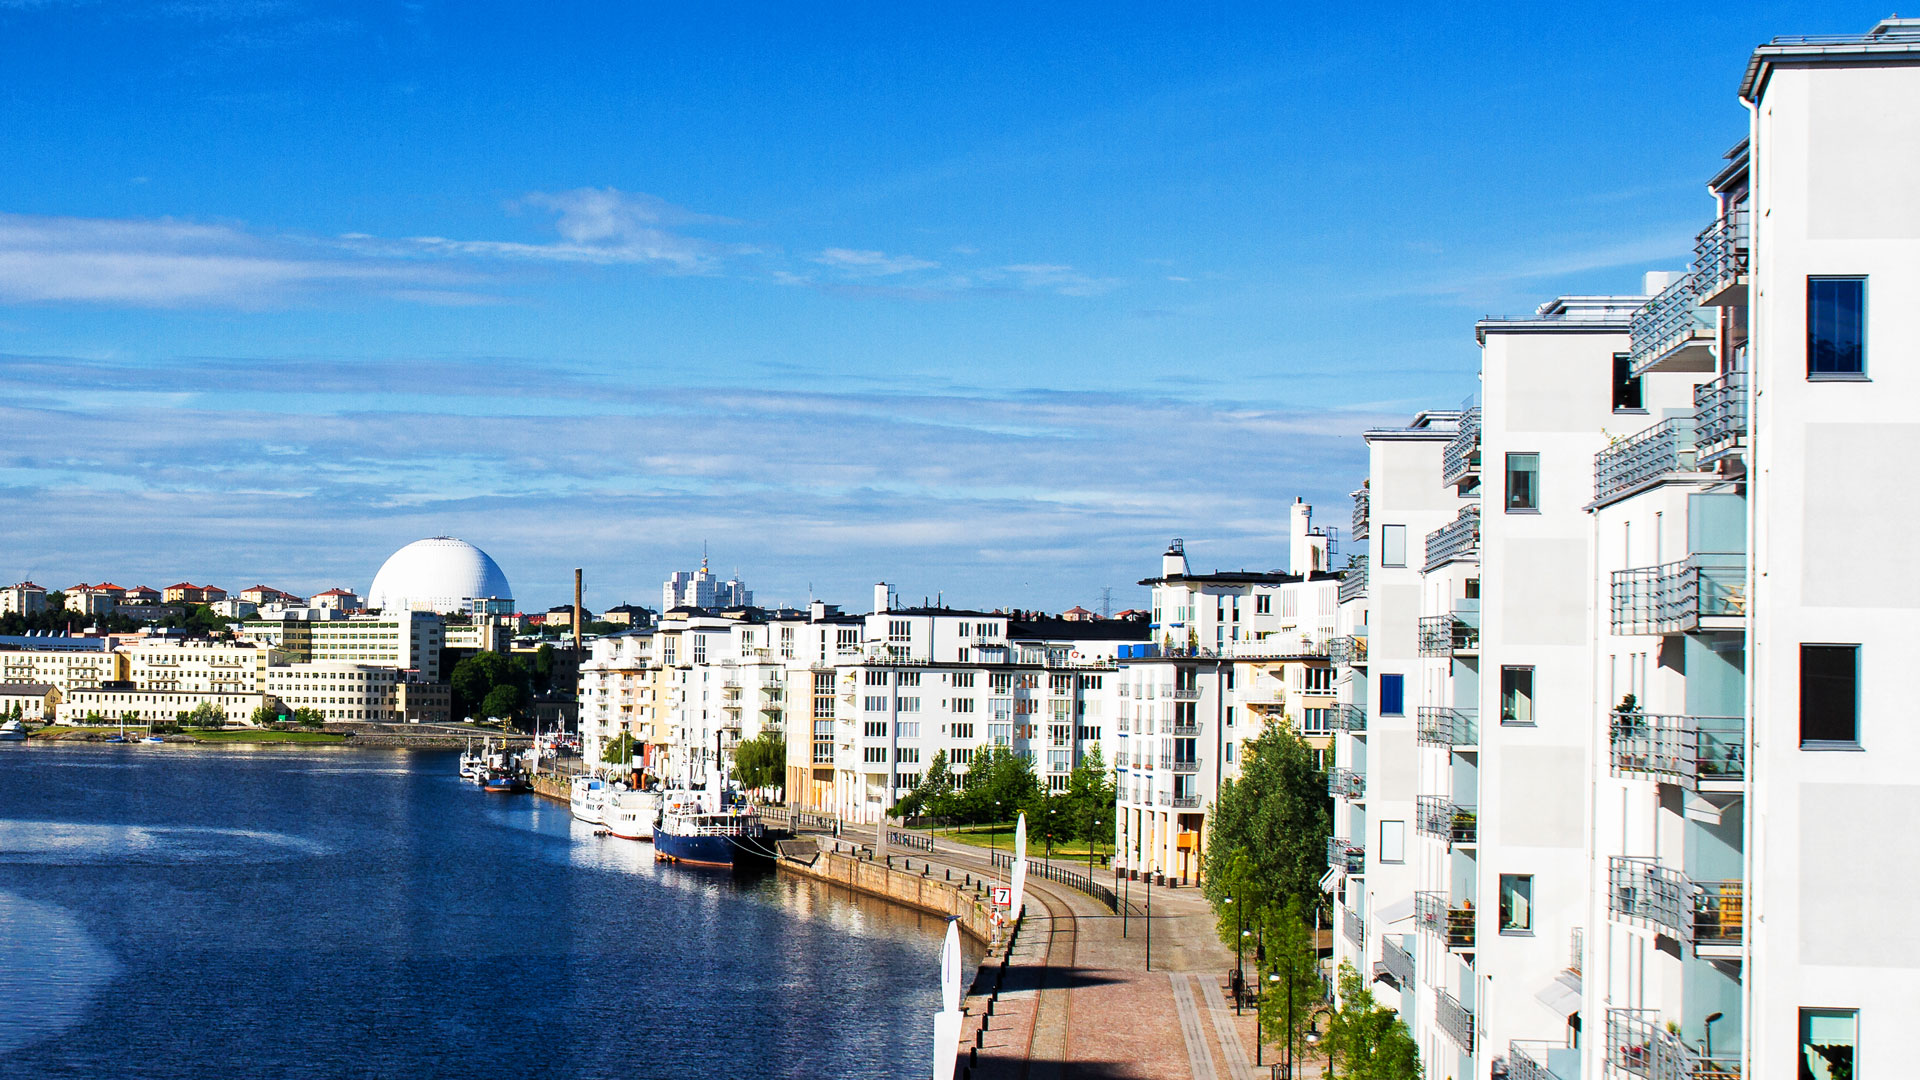 Modern apartment buildings by the water in Stockholm. Photo.